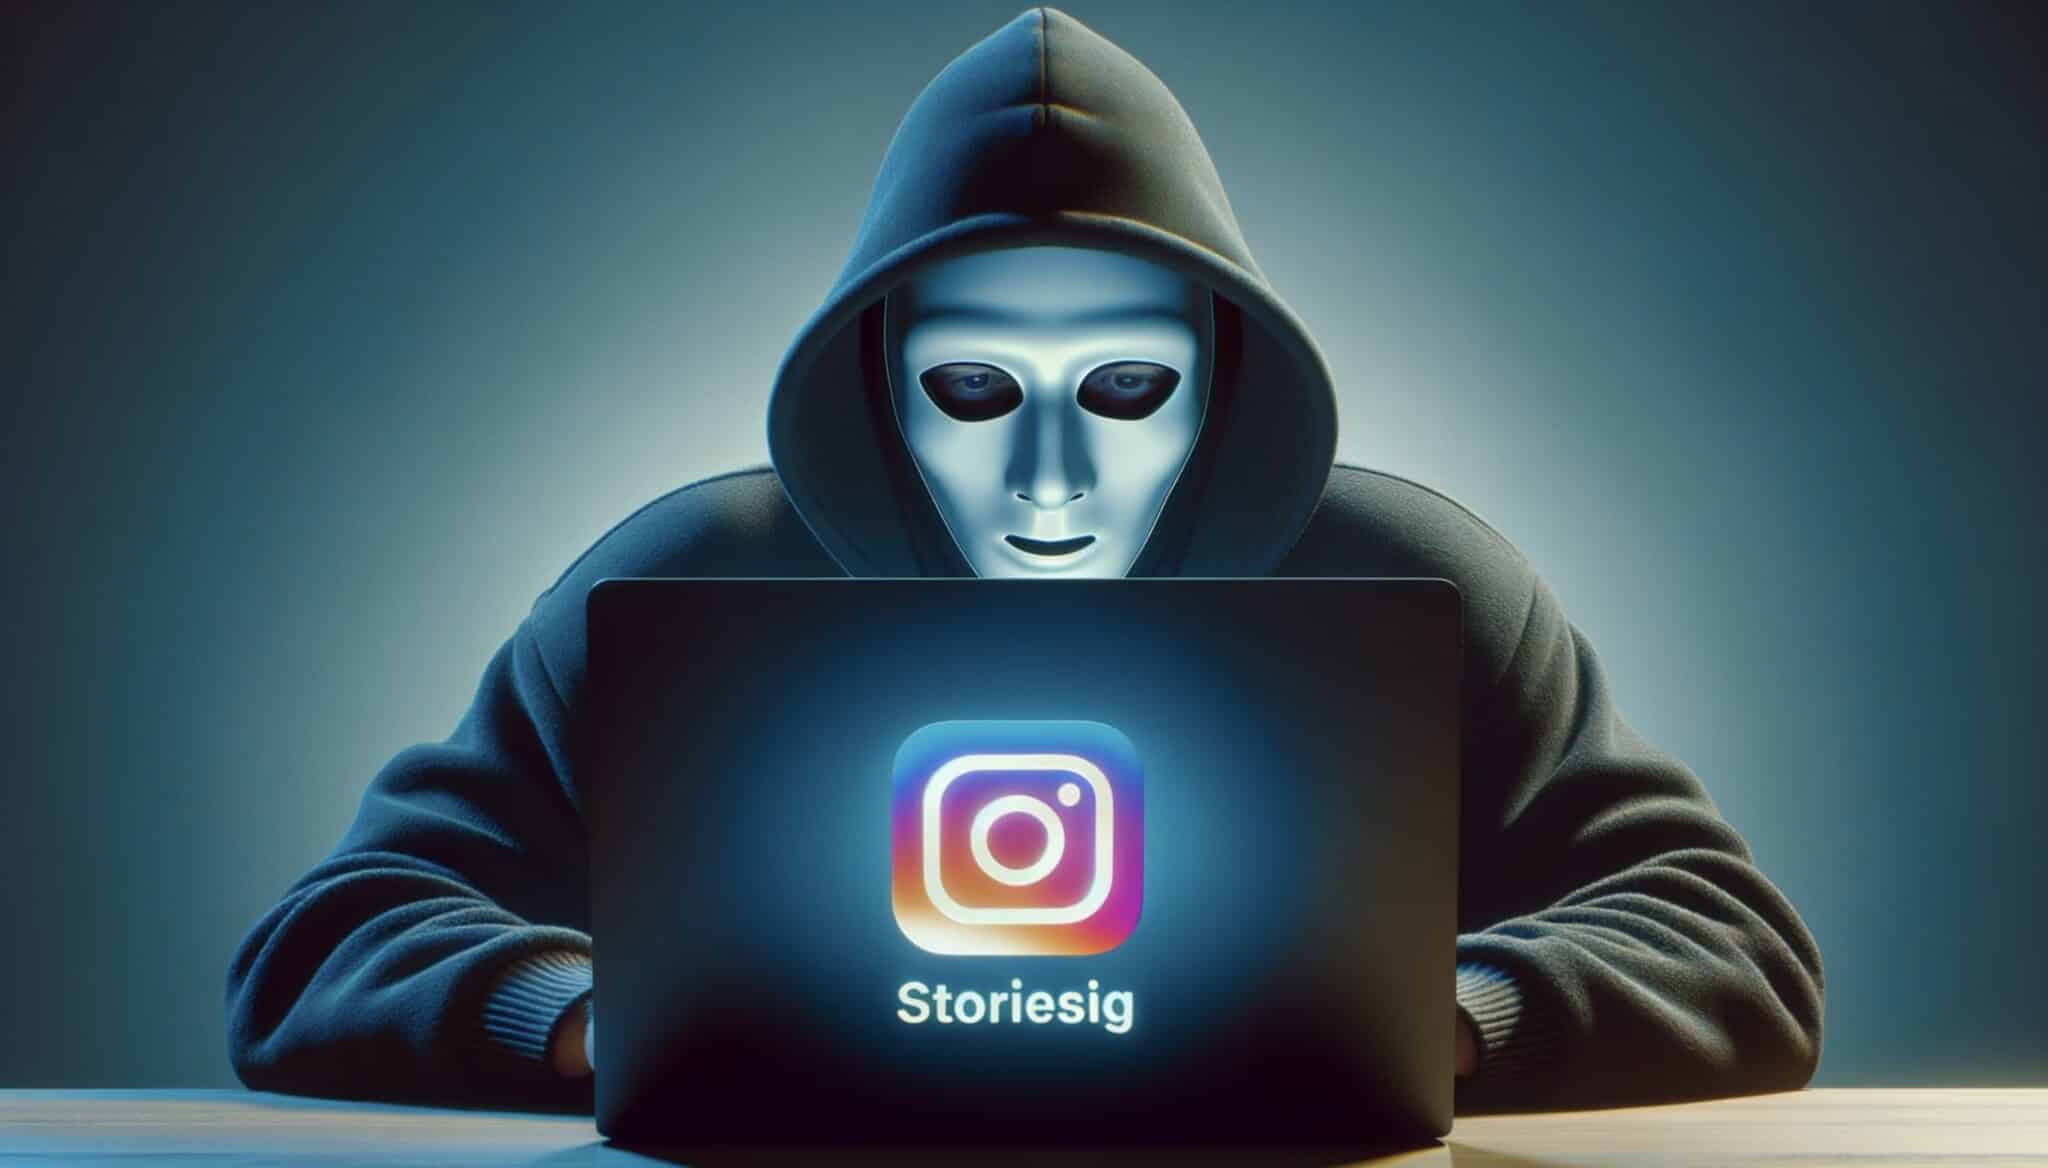 StoriesIG - Visionneuse d'histoires Instagram anonyme